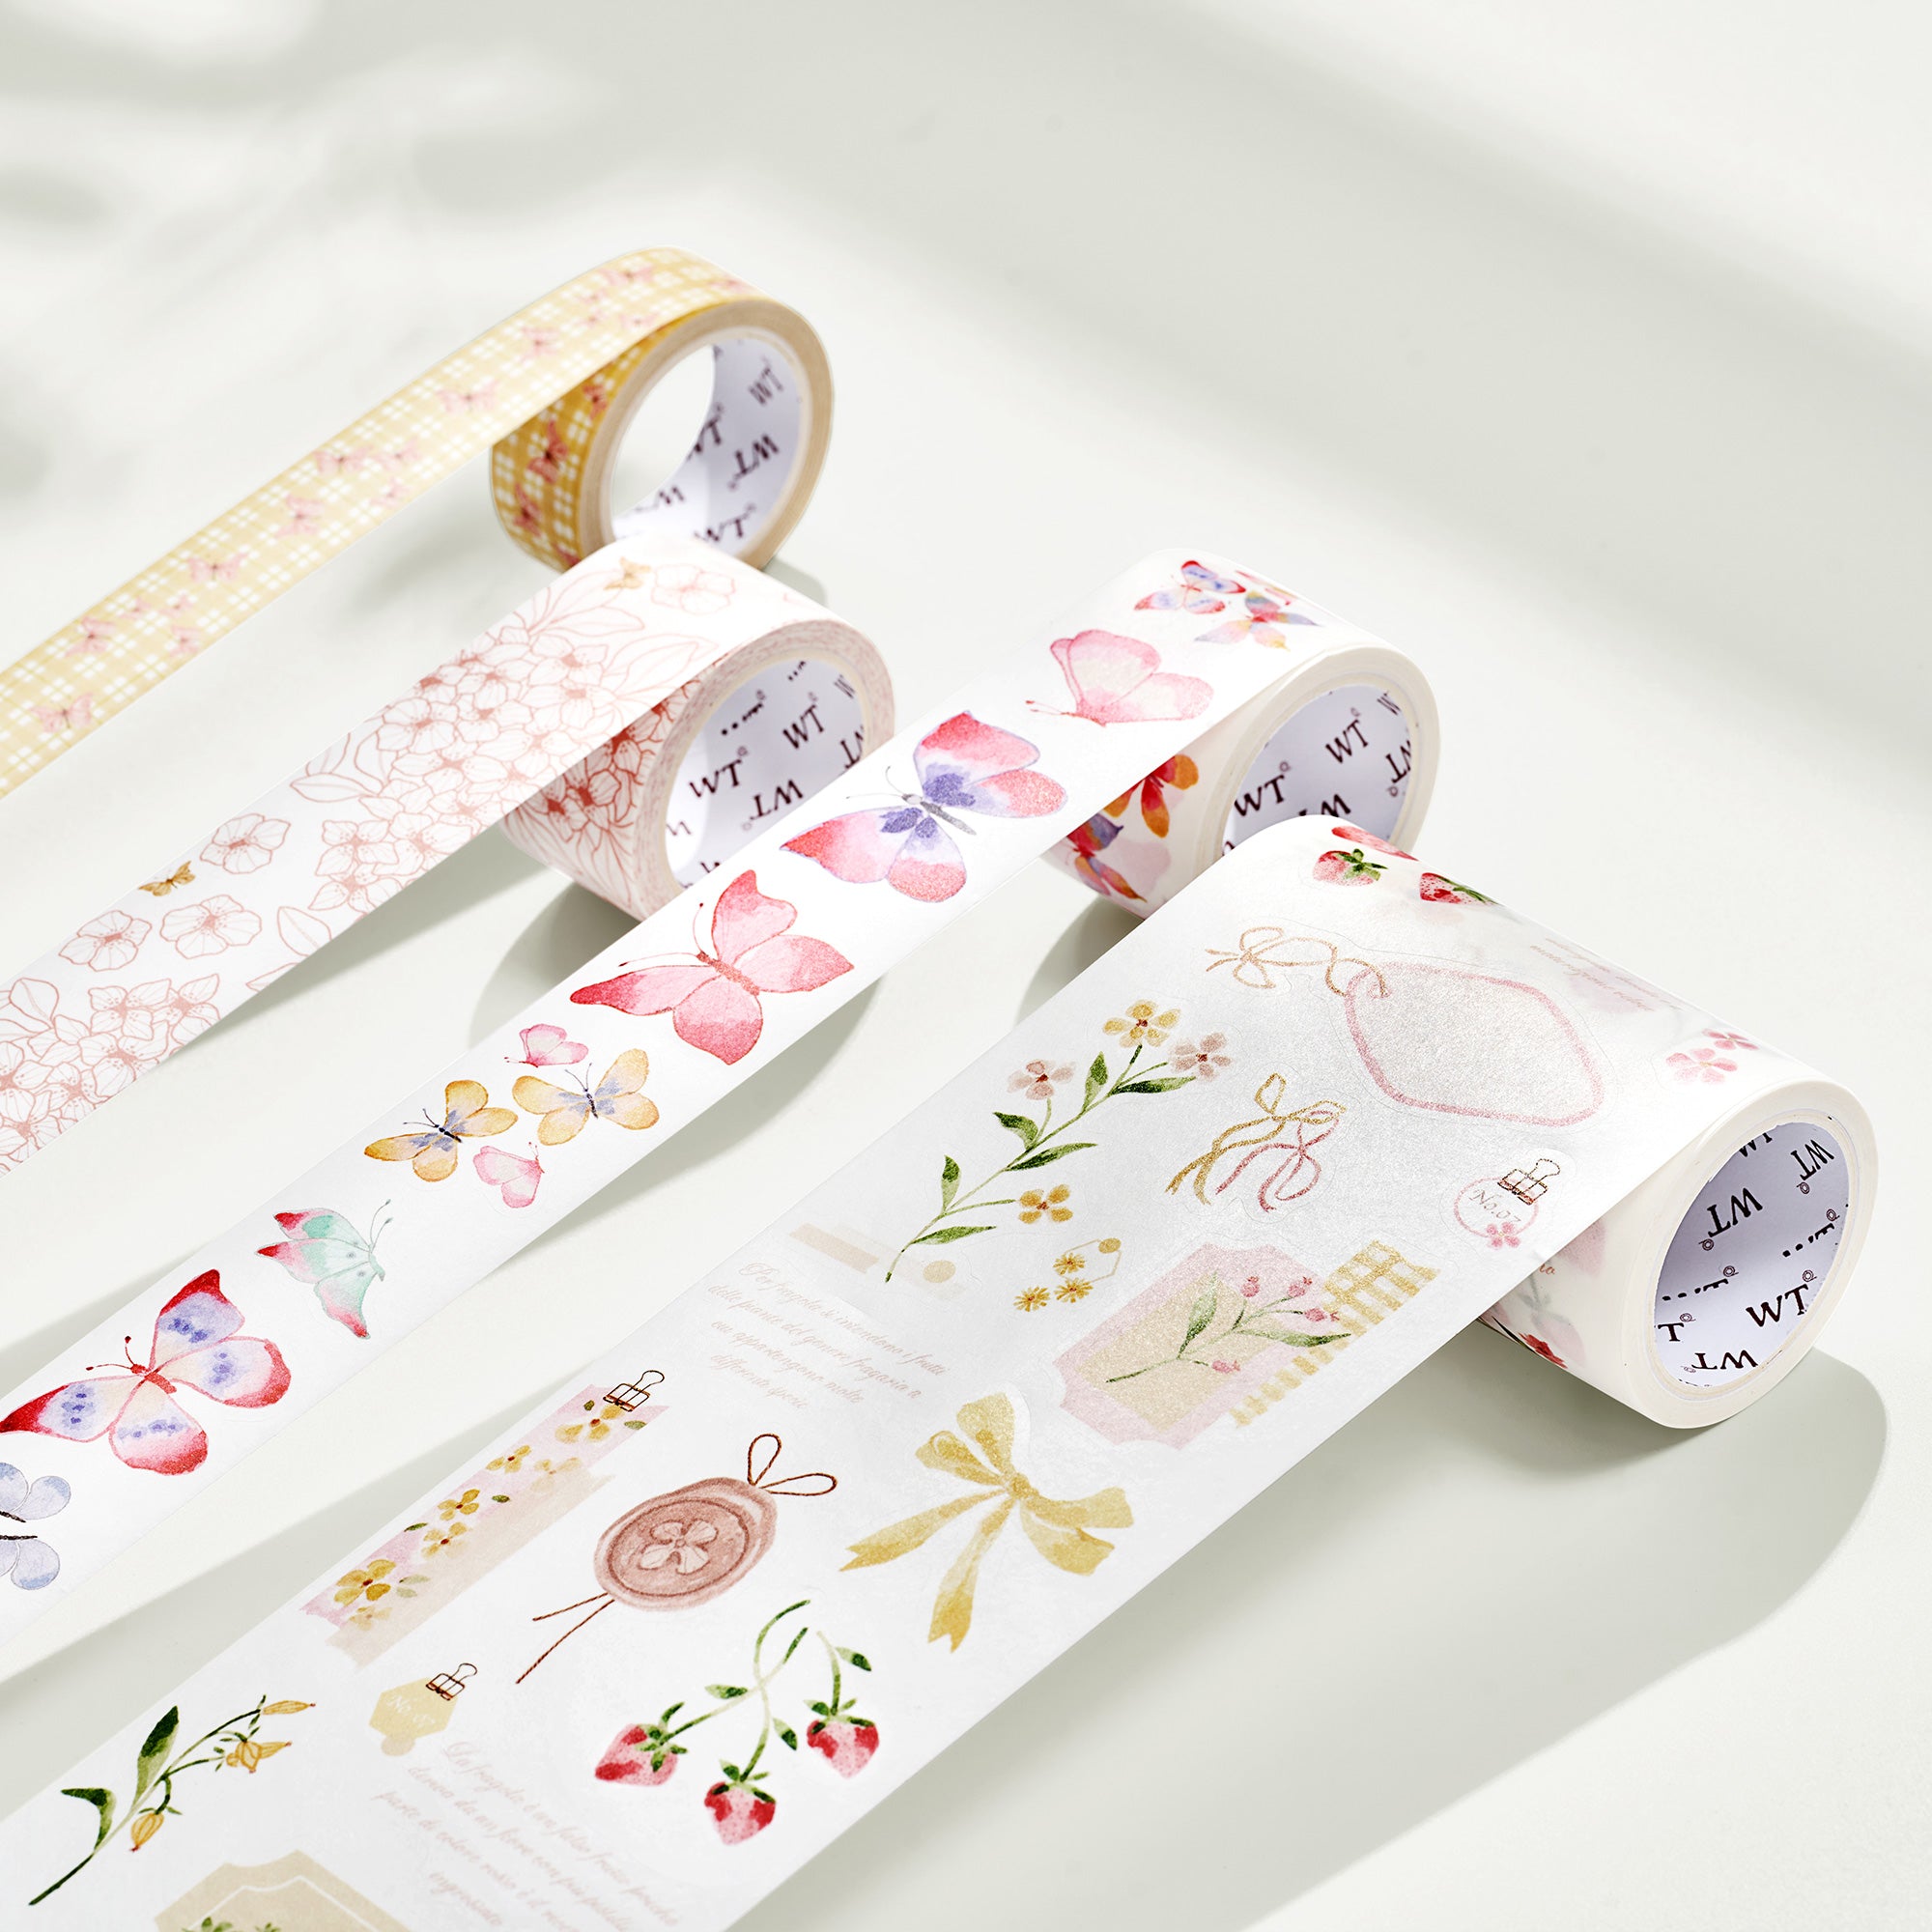 Fragole &amp; Farfalle Washi Tape Sticker Set | The Washi Tape Shop. Beautiful Washi and Decorative Tape For Bullet Journals, Gift Wrapping, Planner Decoration and DIY Projects